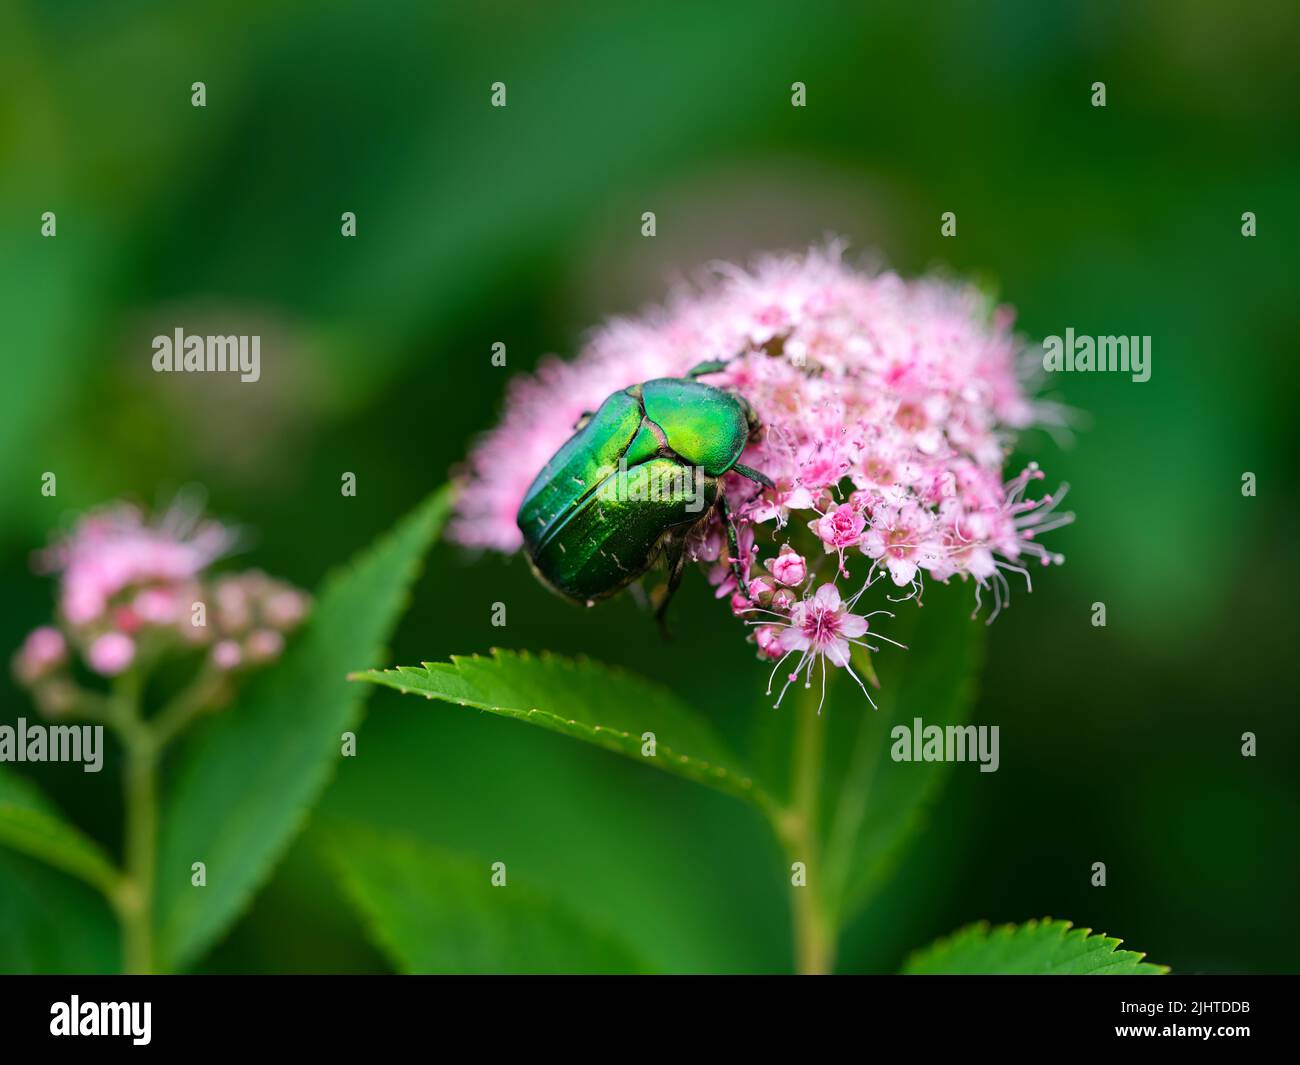 A Green Rose Chafer on a pink Spiraea japonica flower in nature Stock Photo